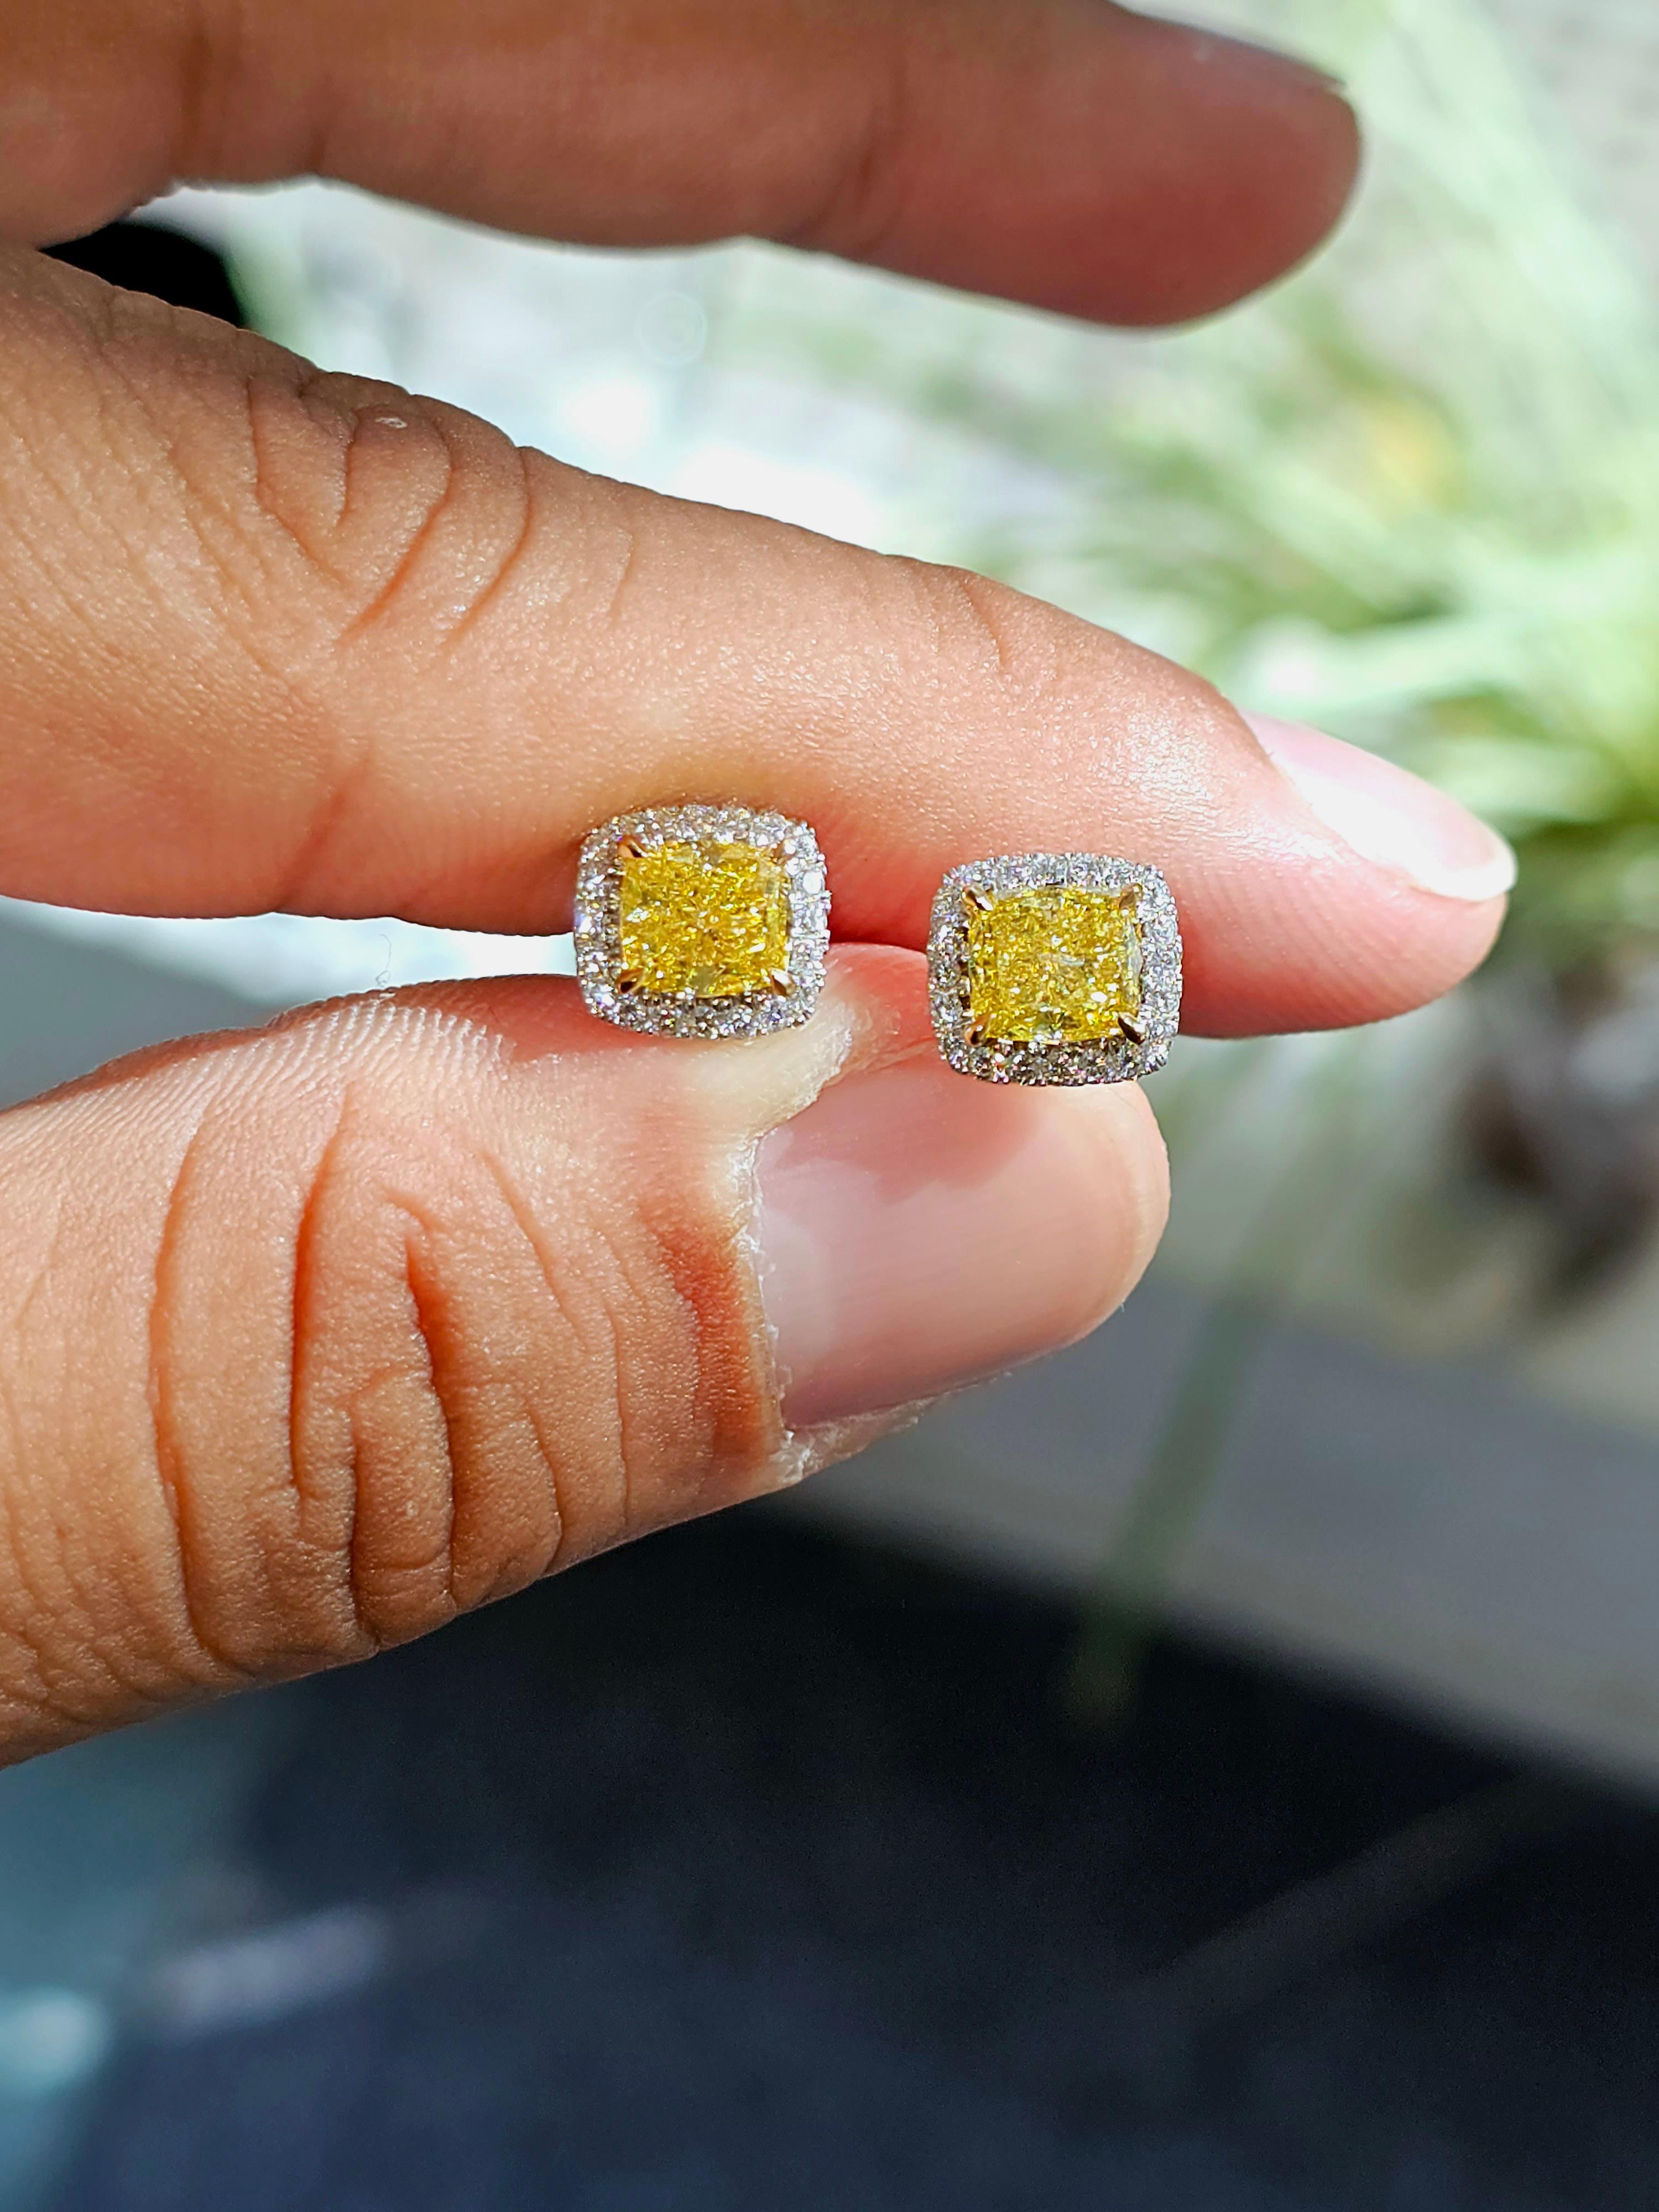 We present to you a perfectly matched pair of Cushion cut diamonds, with the highest grade of Golden Hue certified by the GIA Laboratory, Fancy Vivid-Yellow. 

The oversized 2.44cts pair (1.21cts and 1.23cts respectively) perfectly represents